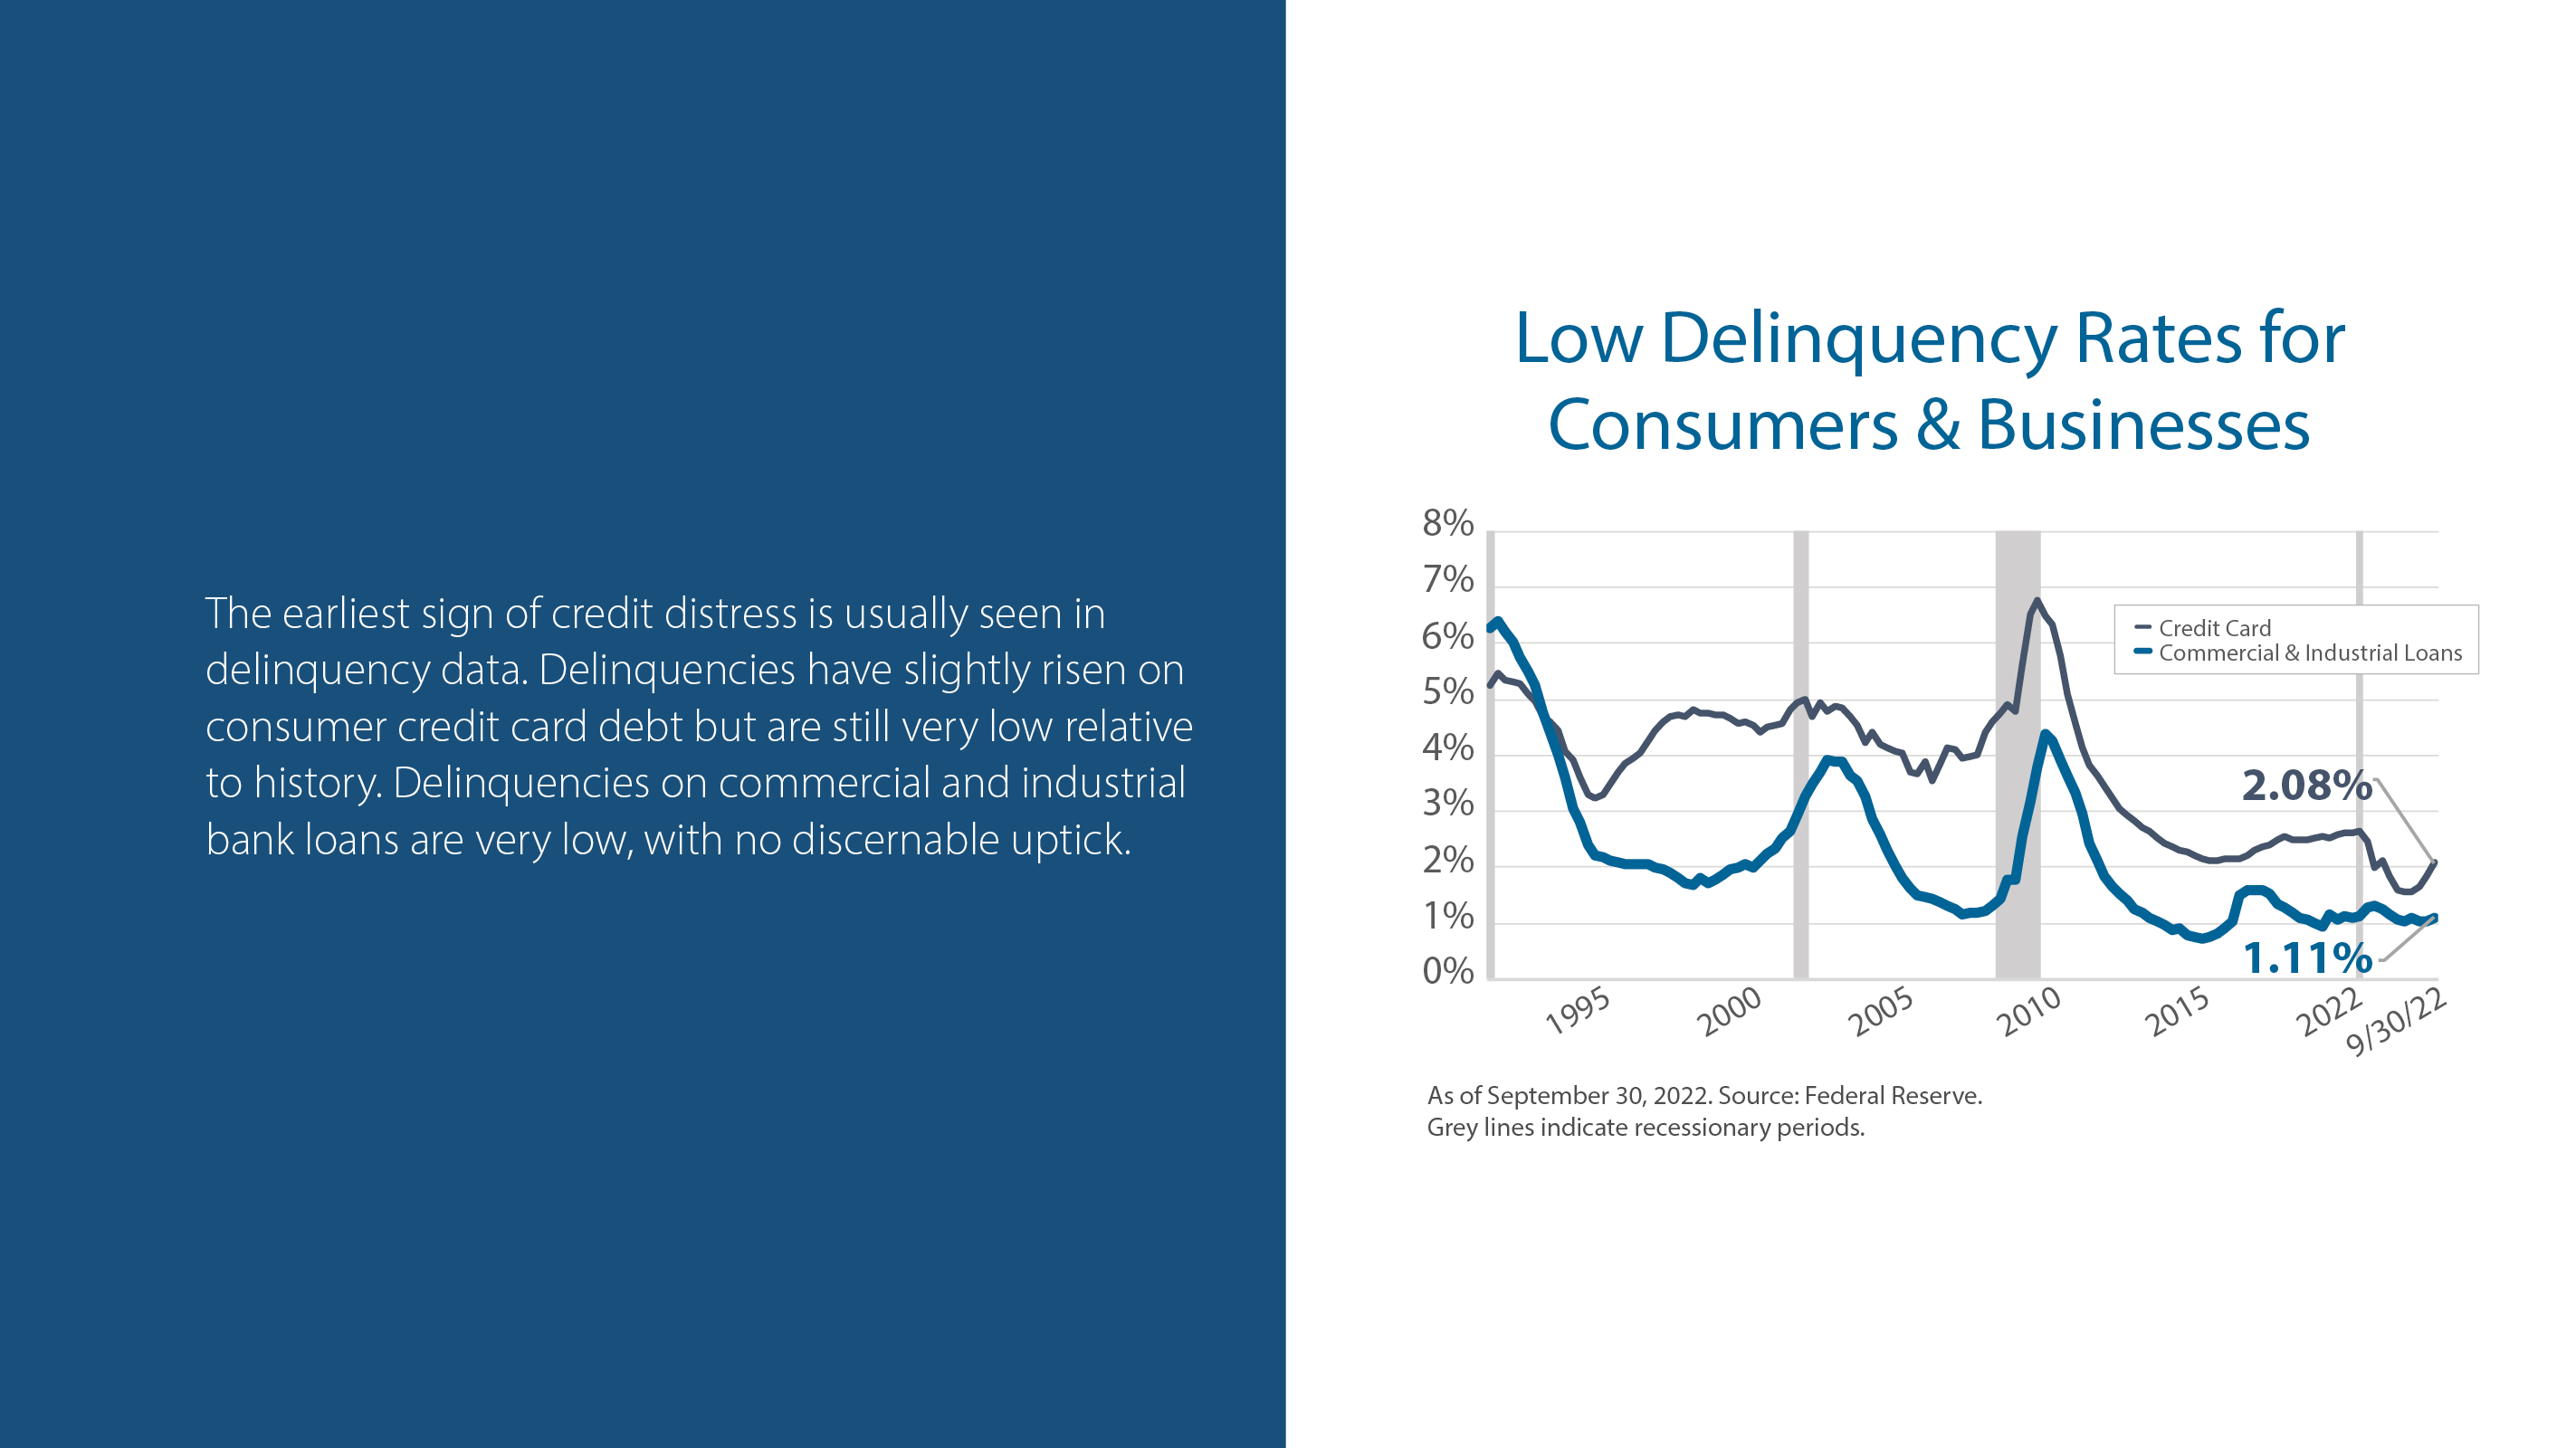 Low Delinquency Rates for Consumers & Businesses